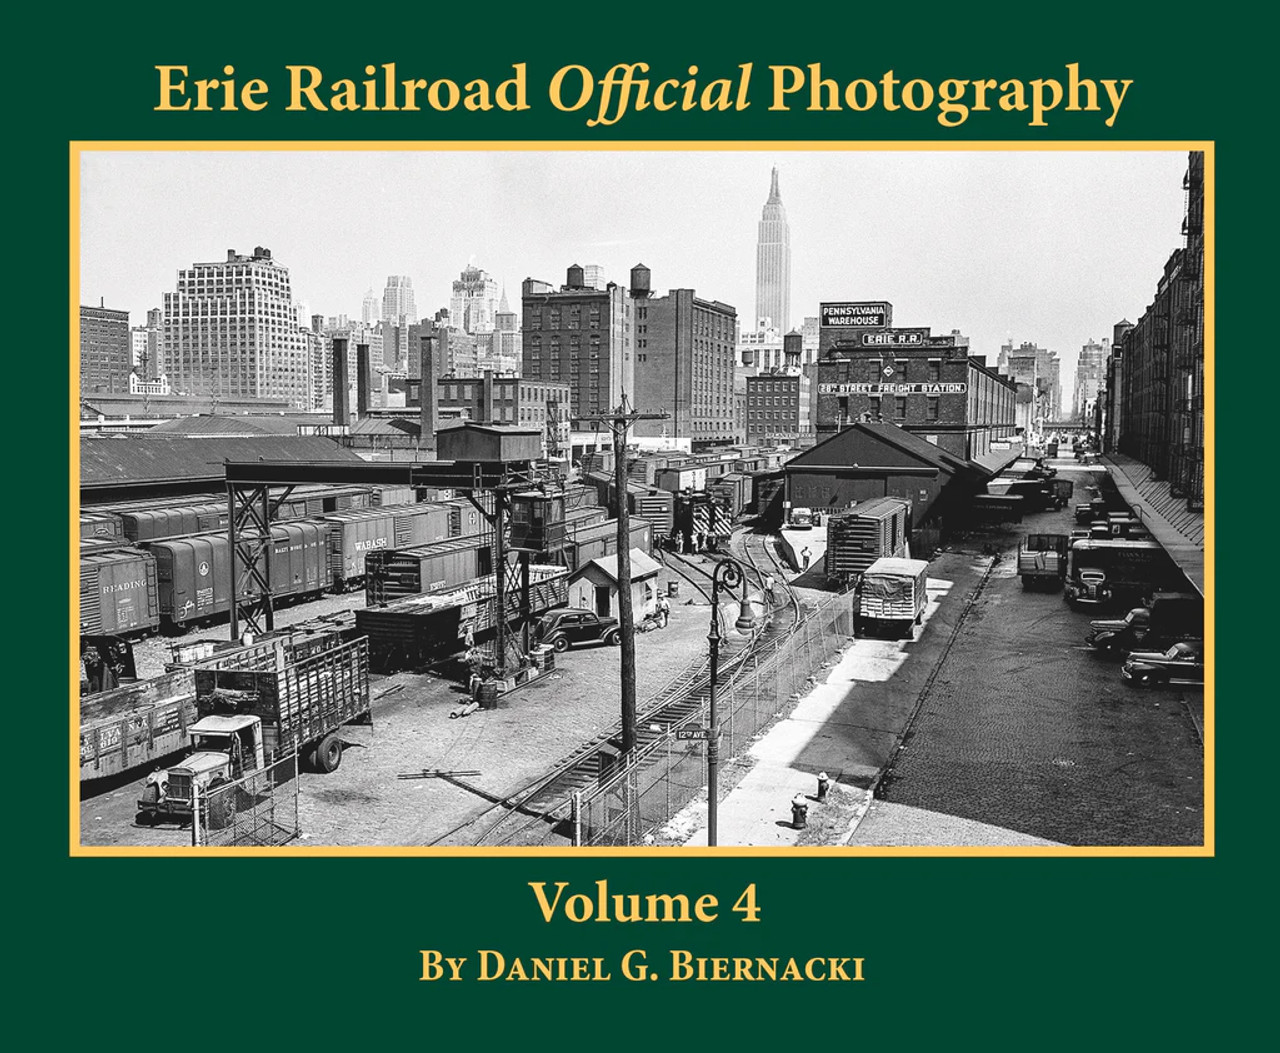 Morning Sun 6638 Erie Railroad Official Photography Volume 4 (Softcover)